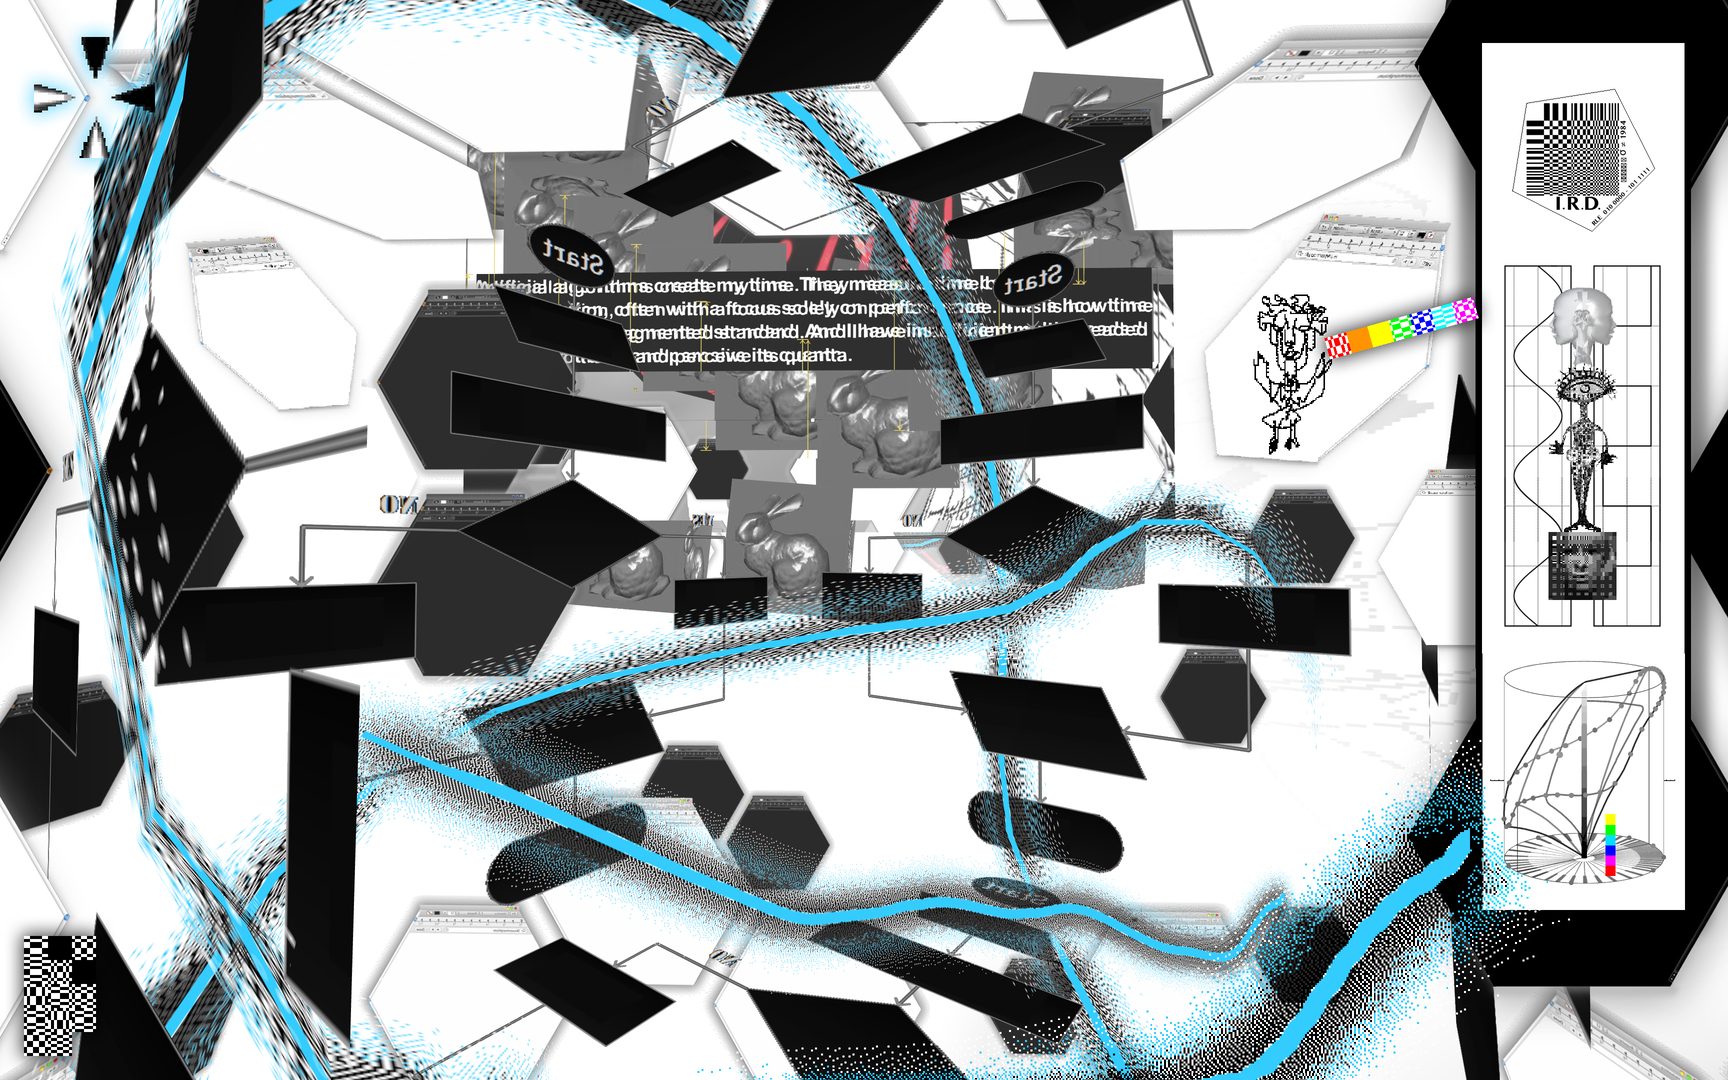 A glitchy black-and-white digital collage with text and pale blue scribbles